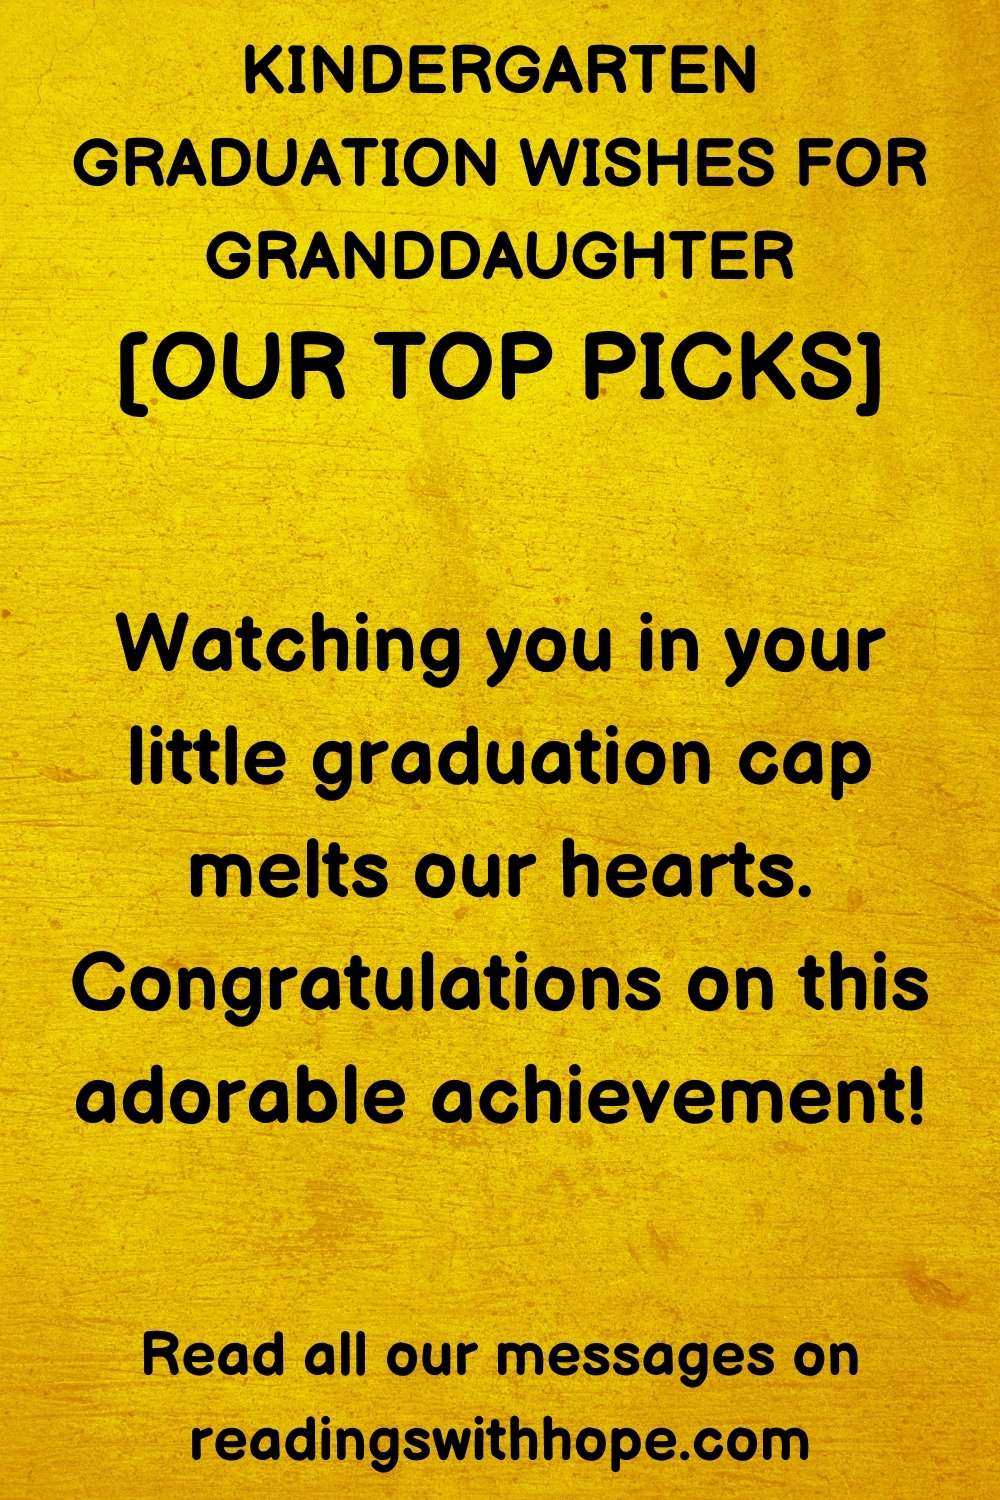 kindergarten graduation wishes for granddaughter that says "Watching you in your little graduation cap melts our hearts. Congratulations on this adorable achievement!"